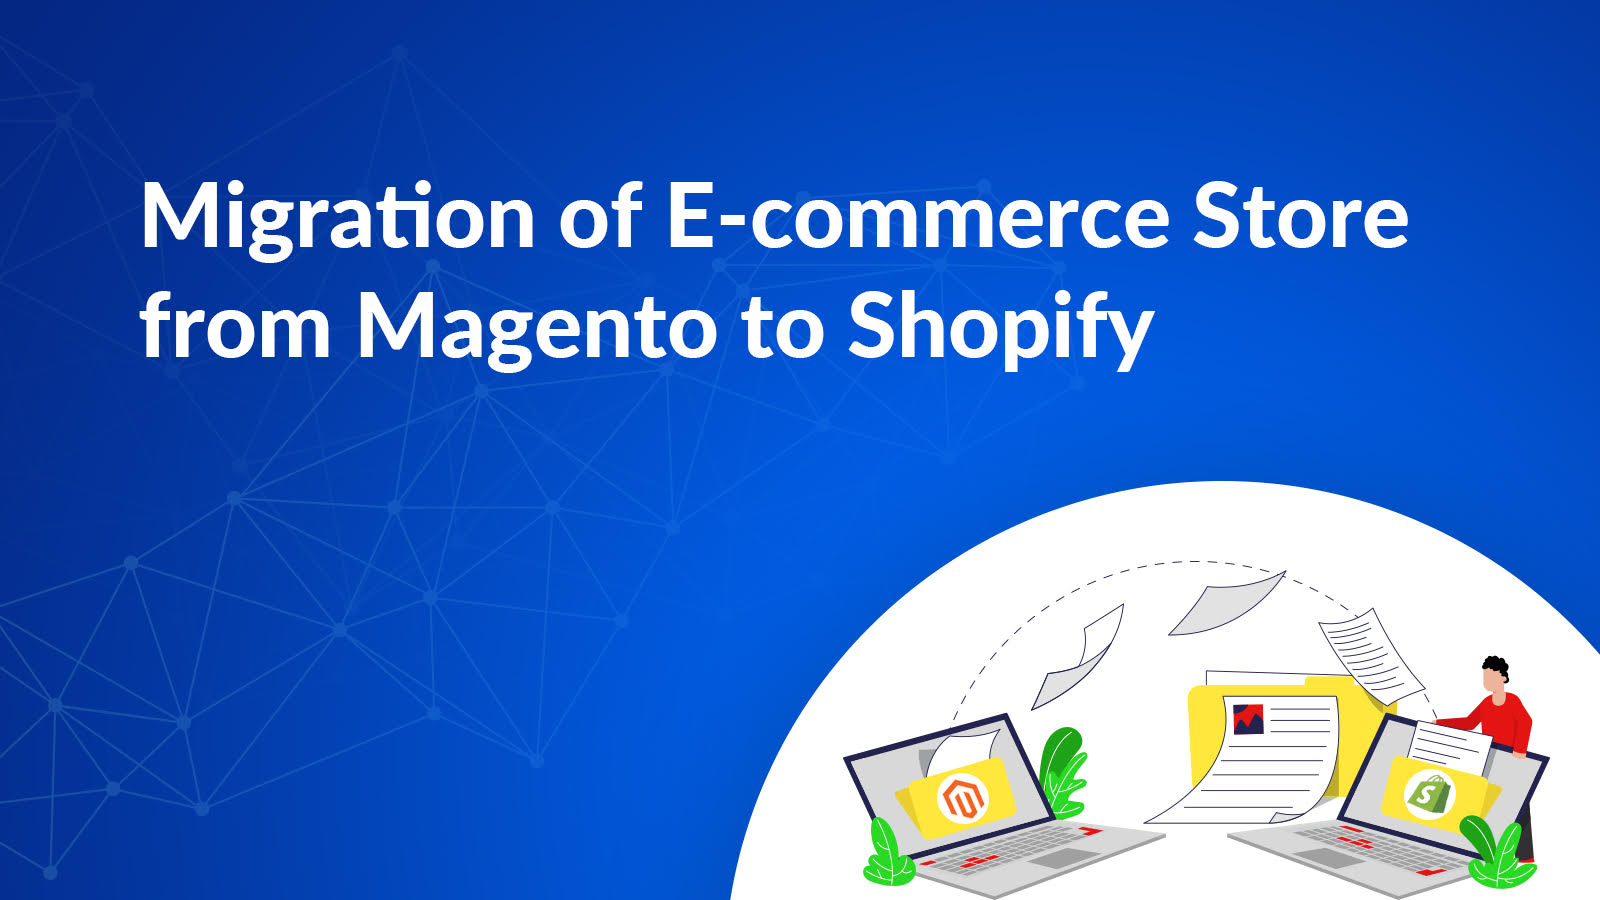 In this article, you will get the information on how to migrate your e-commerce store from Magento to Shopify